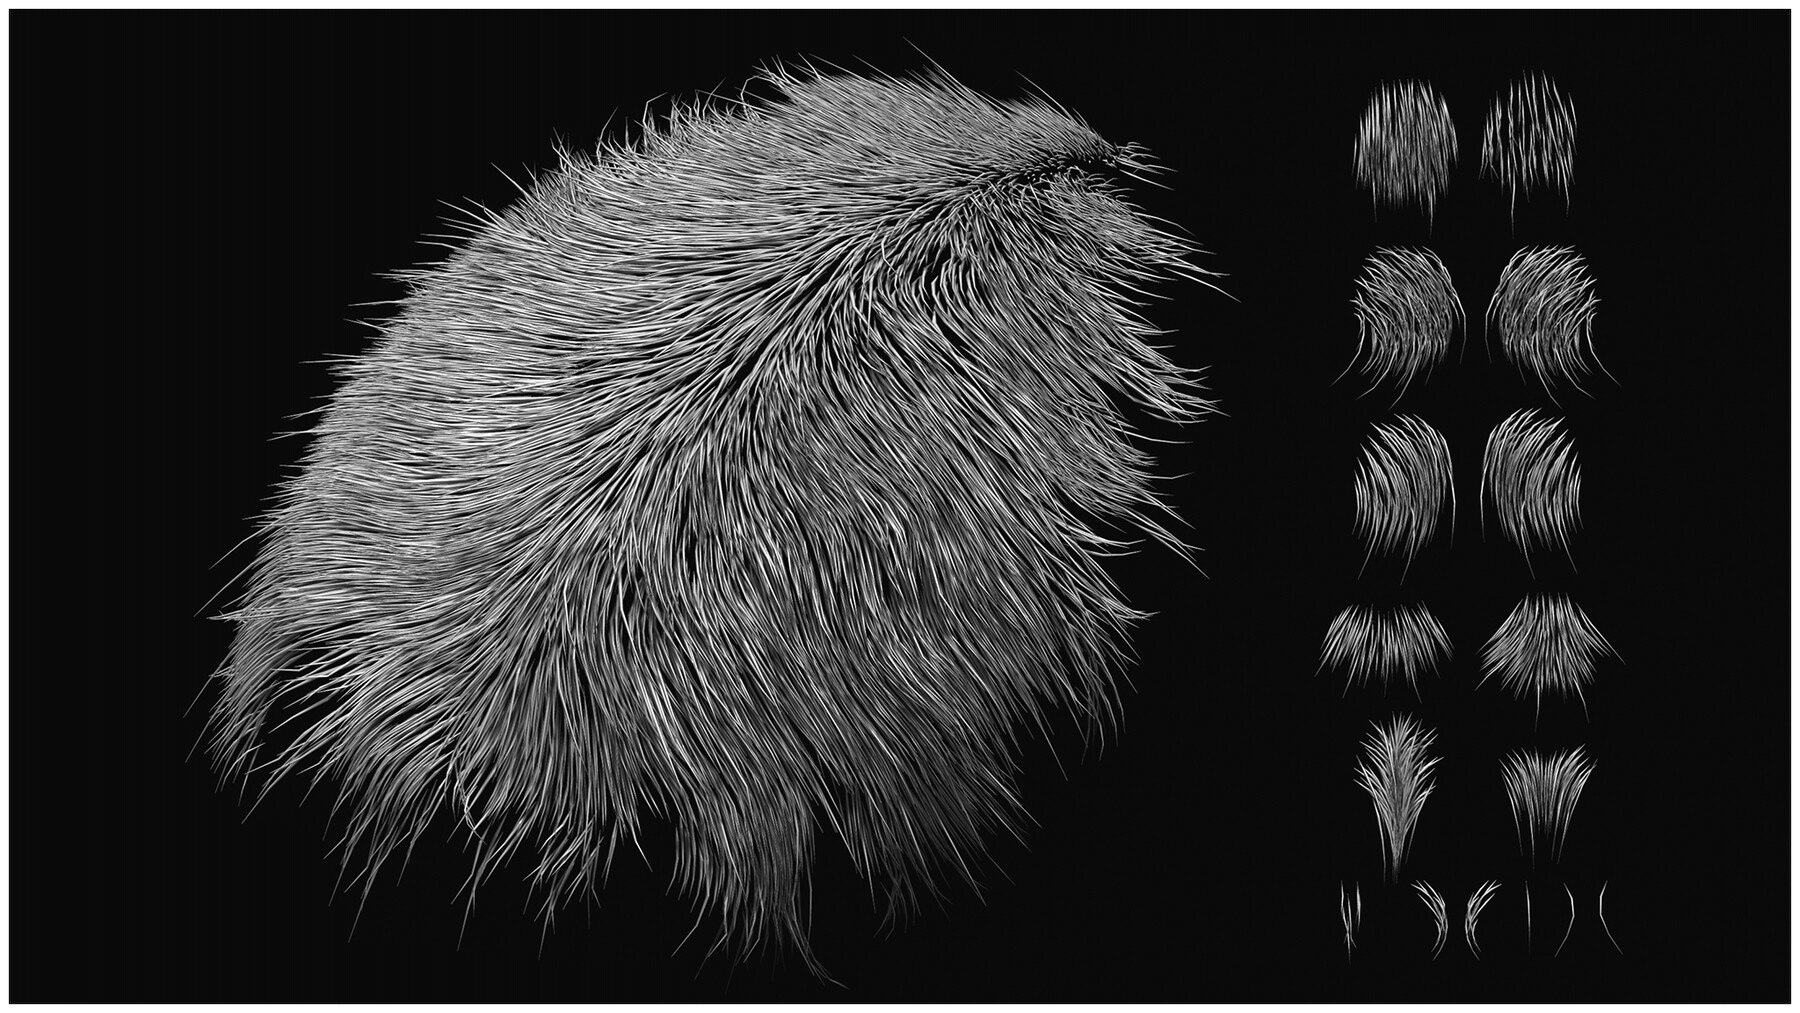 fur noise in zbrush